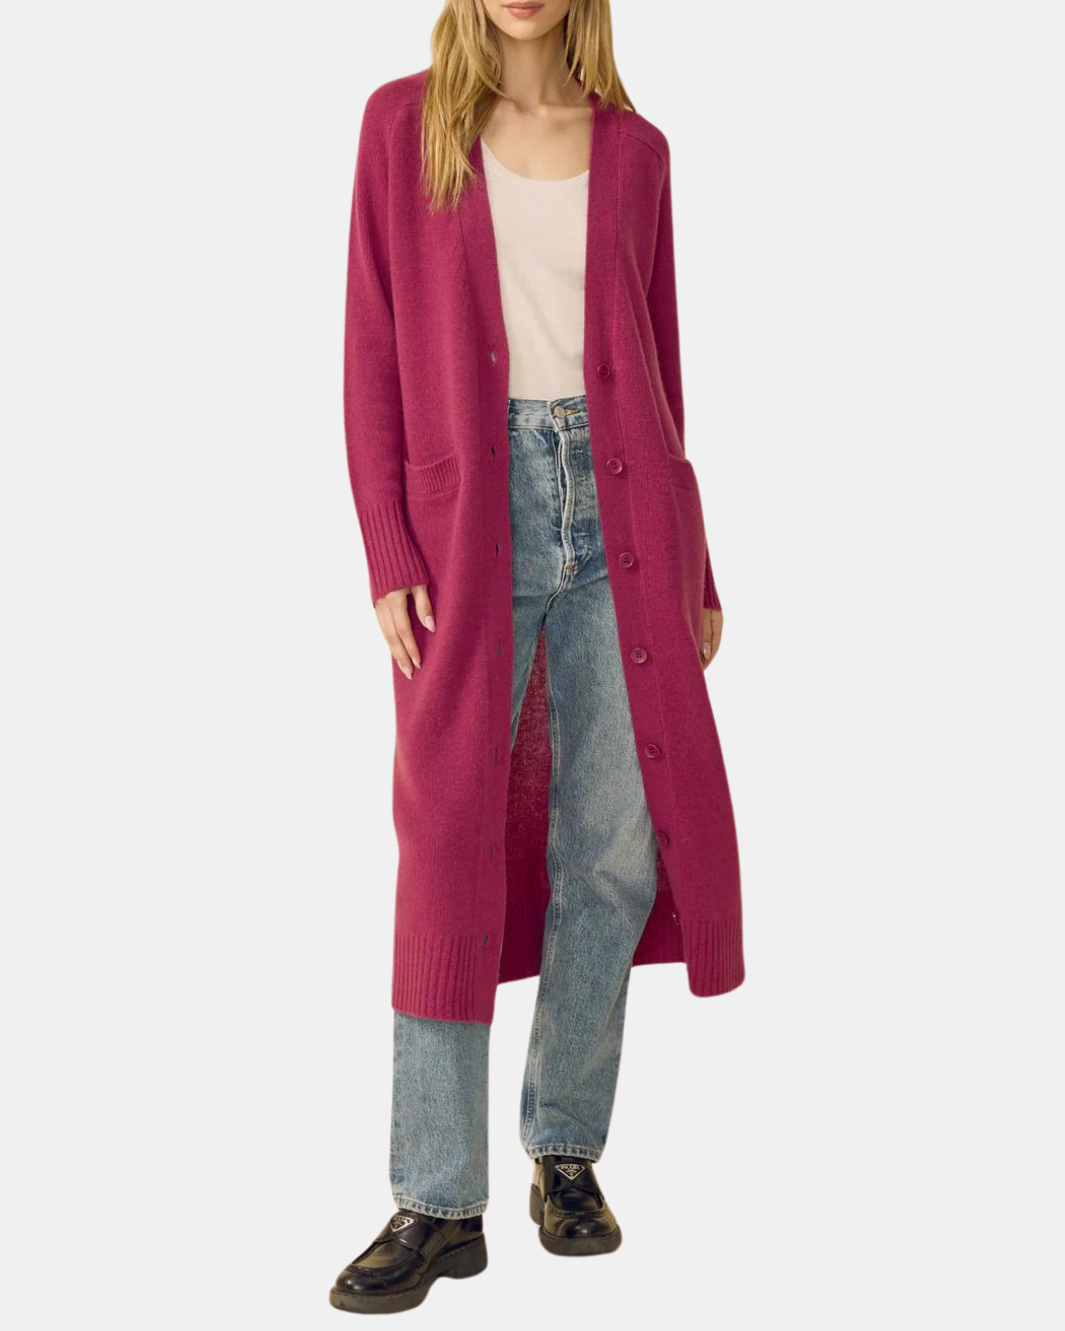 MORGAN CASHMERE DUSTER IN MULBERRY - Romi Boutique